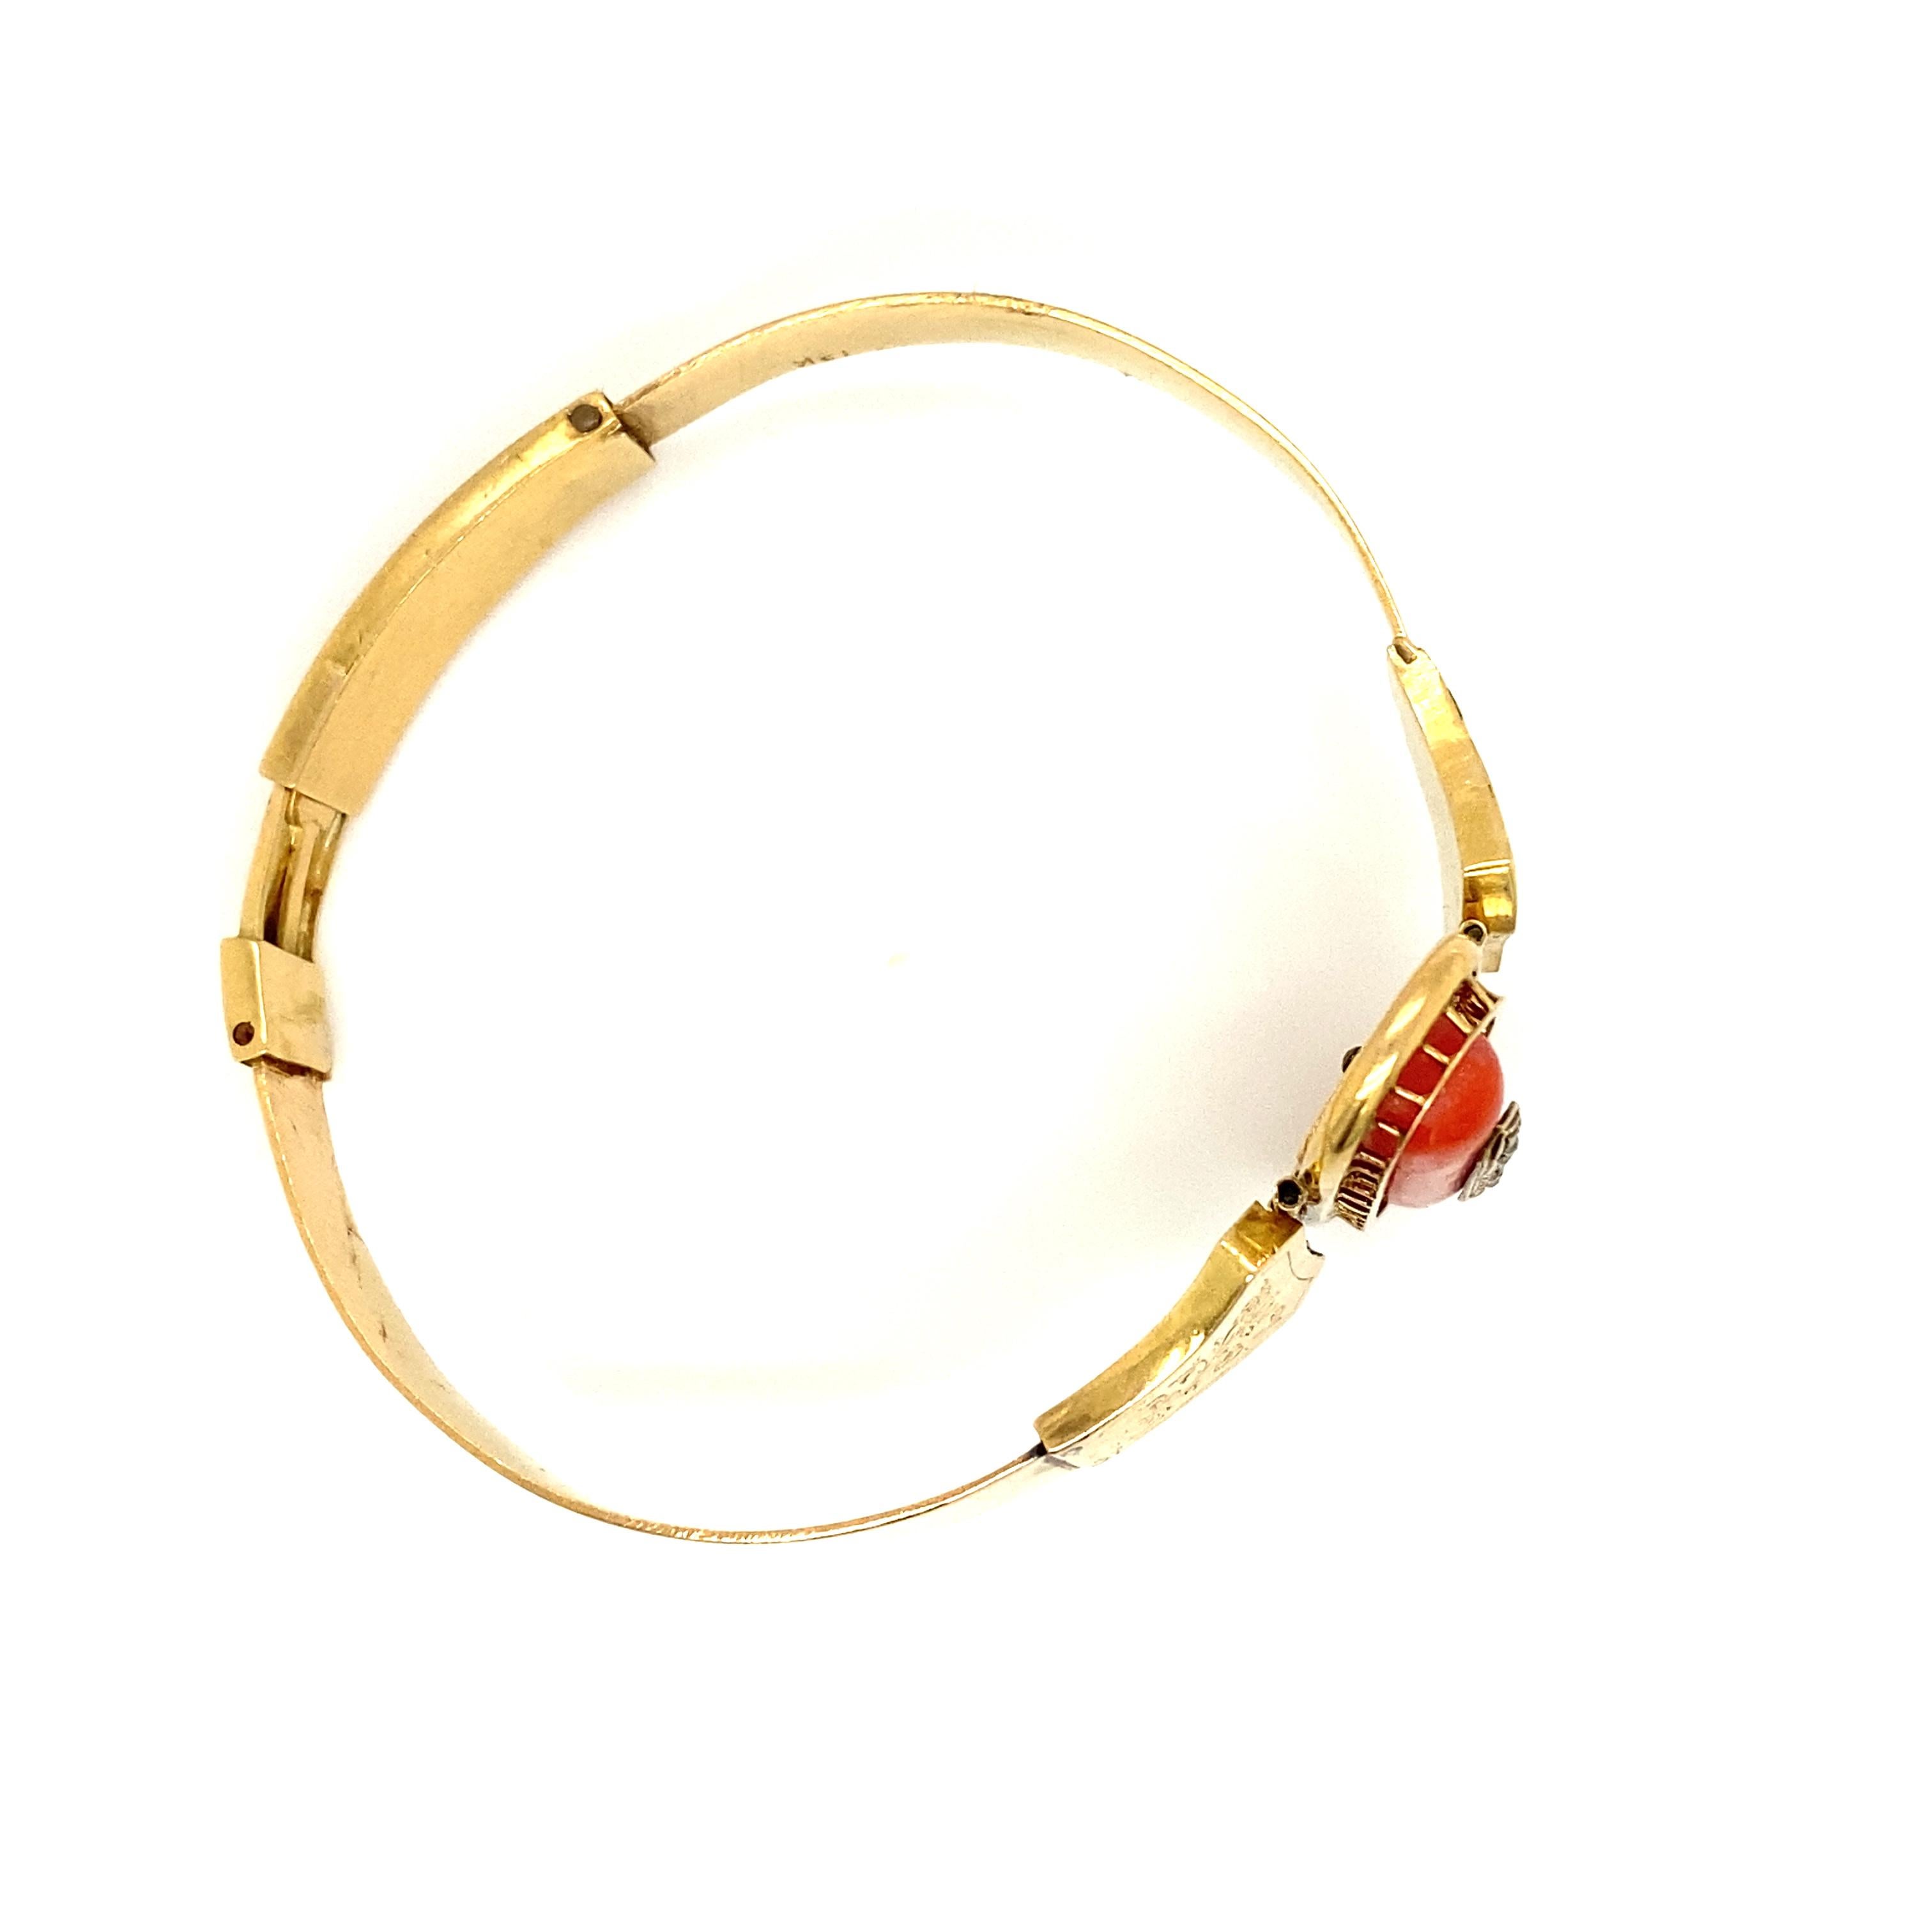 Circa 1890s Victorian Coral and Diamond Bracelet in 14 Karat Gold For Sale 2